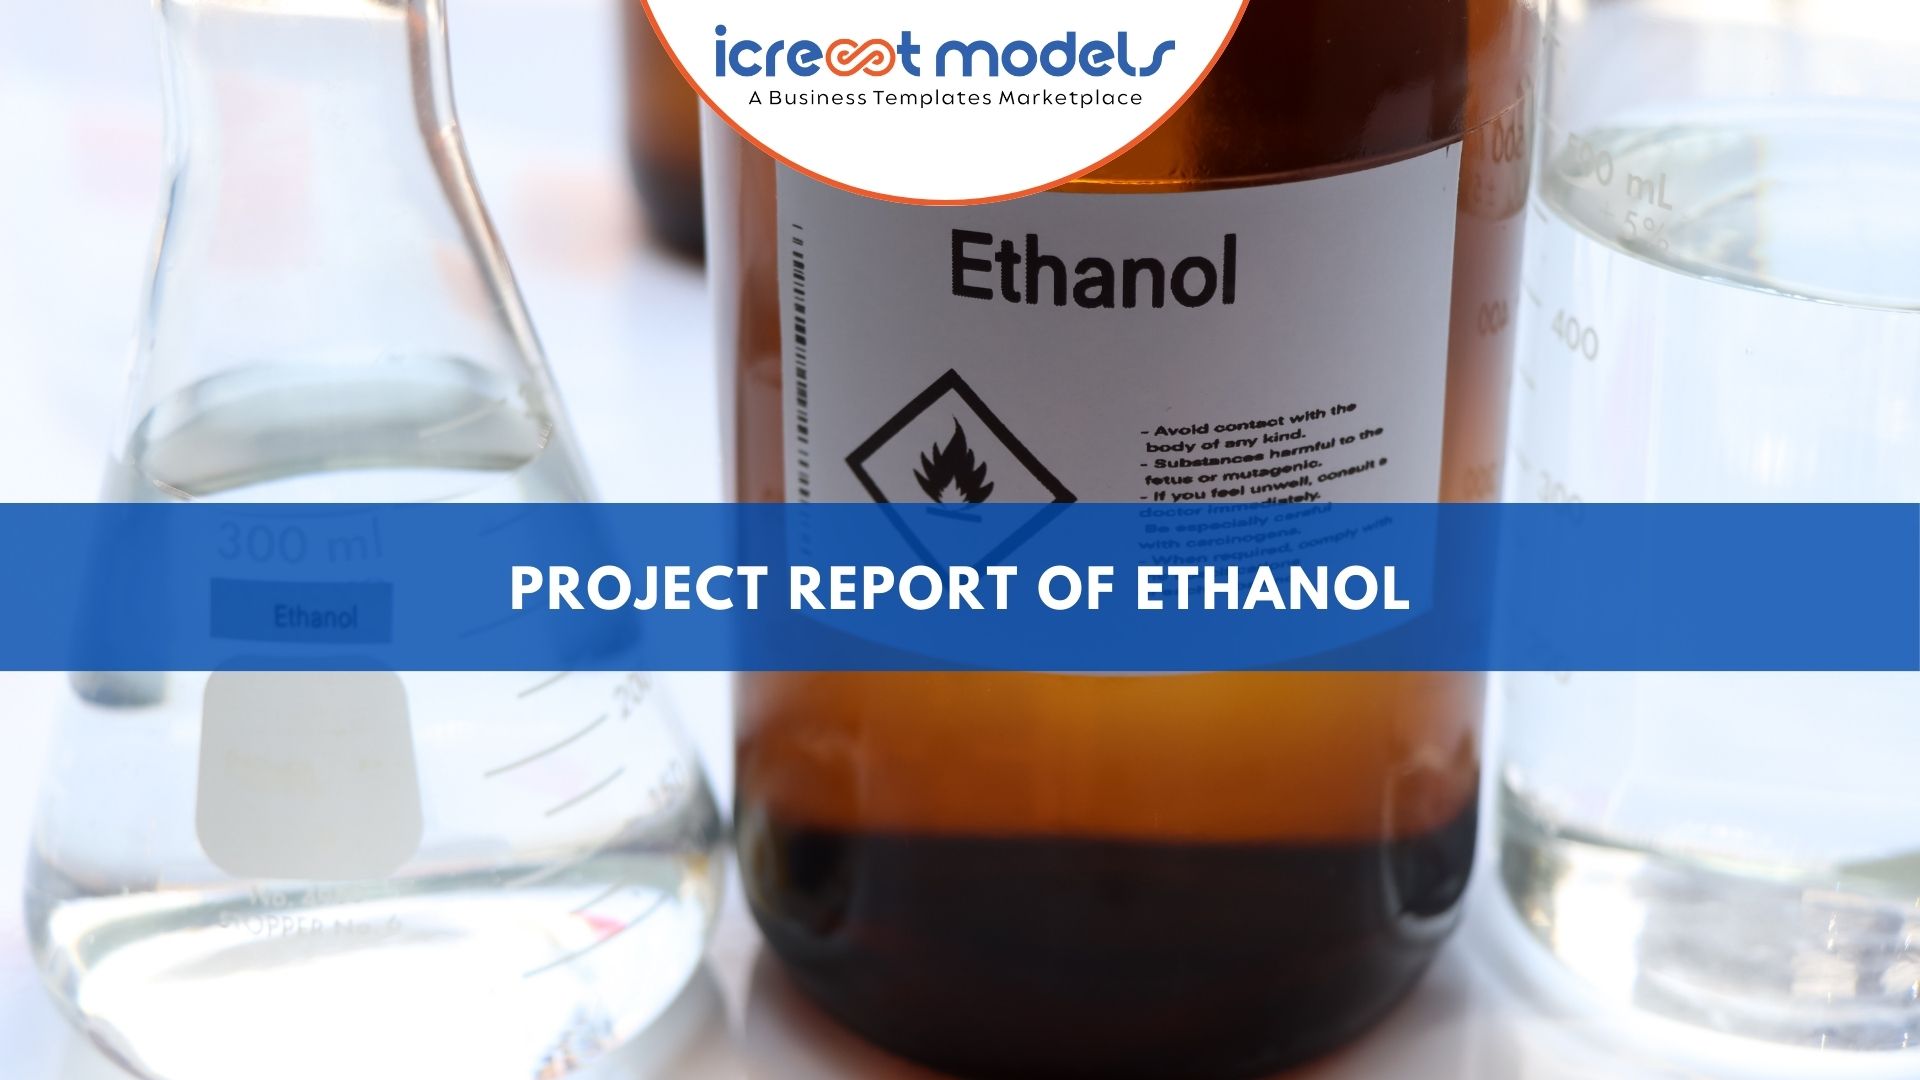 PROJECT REPORT OF ETHANOL